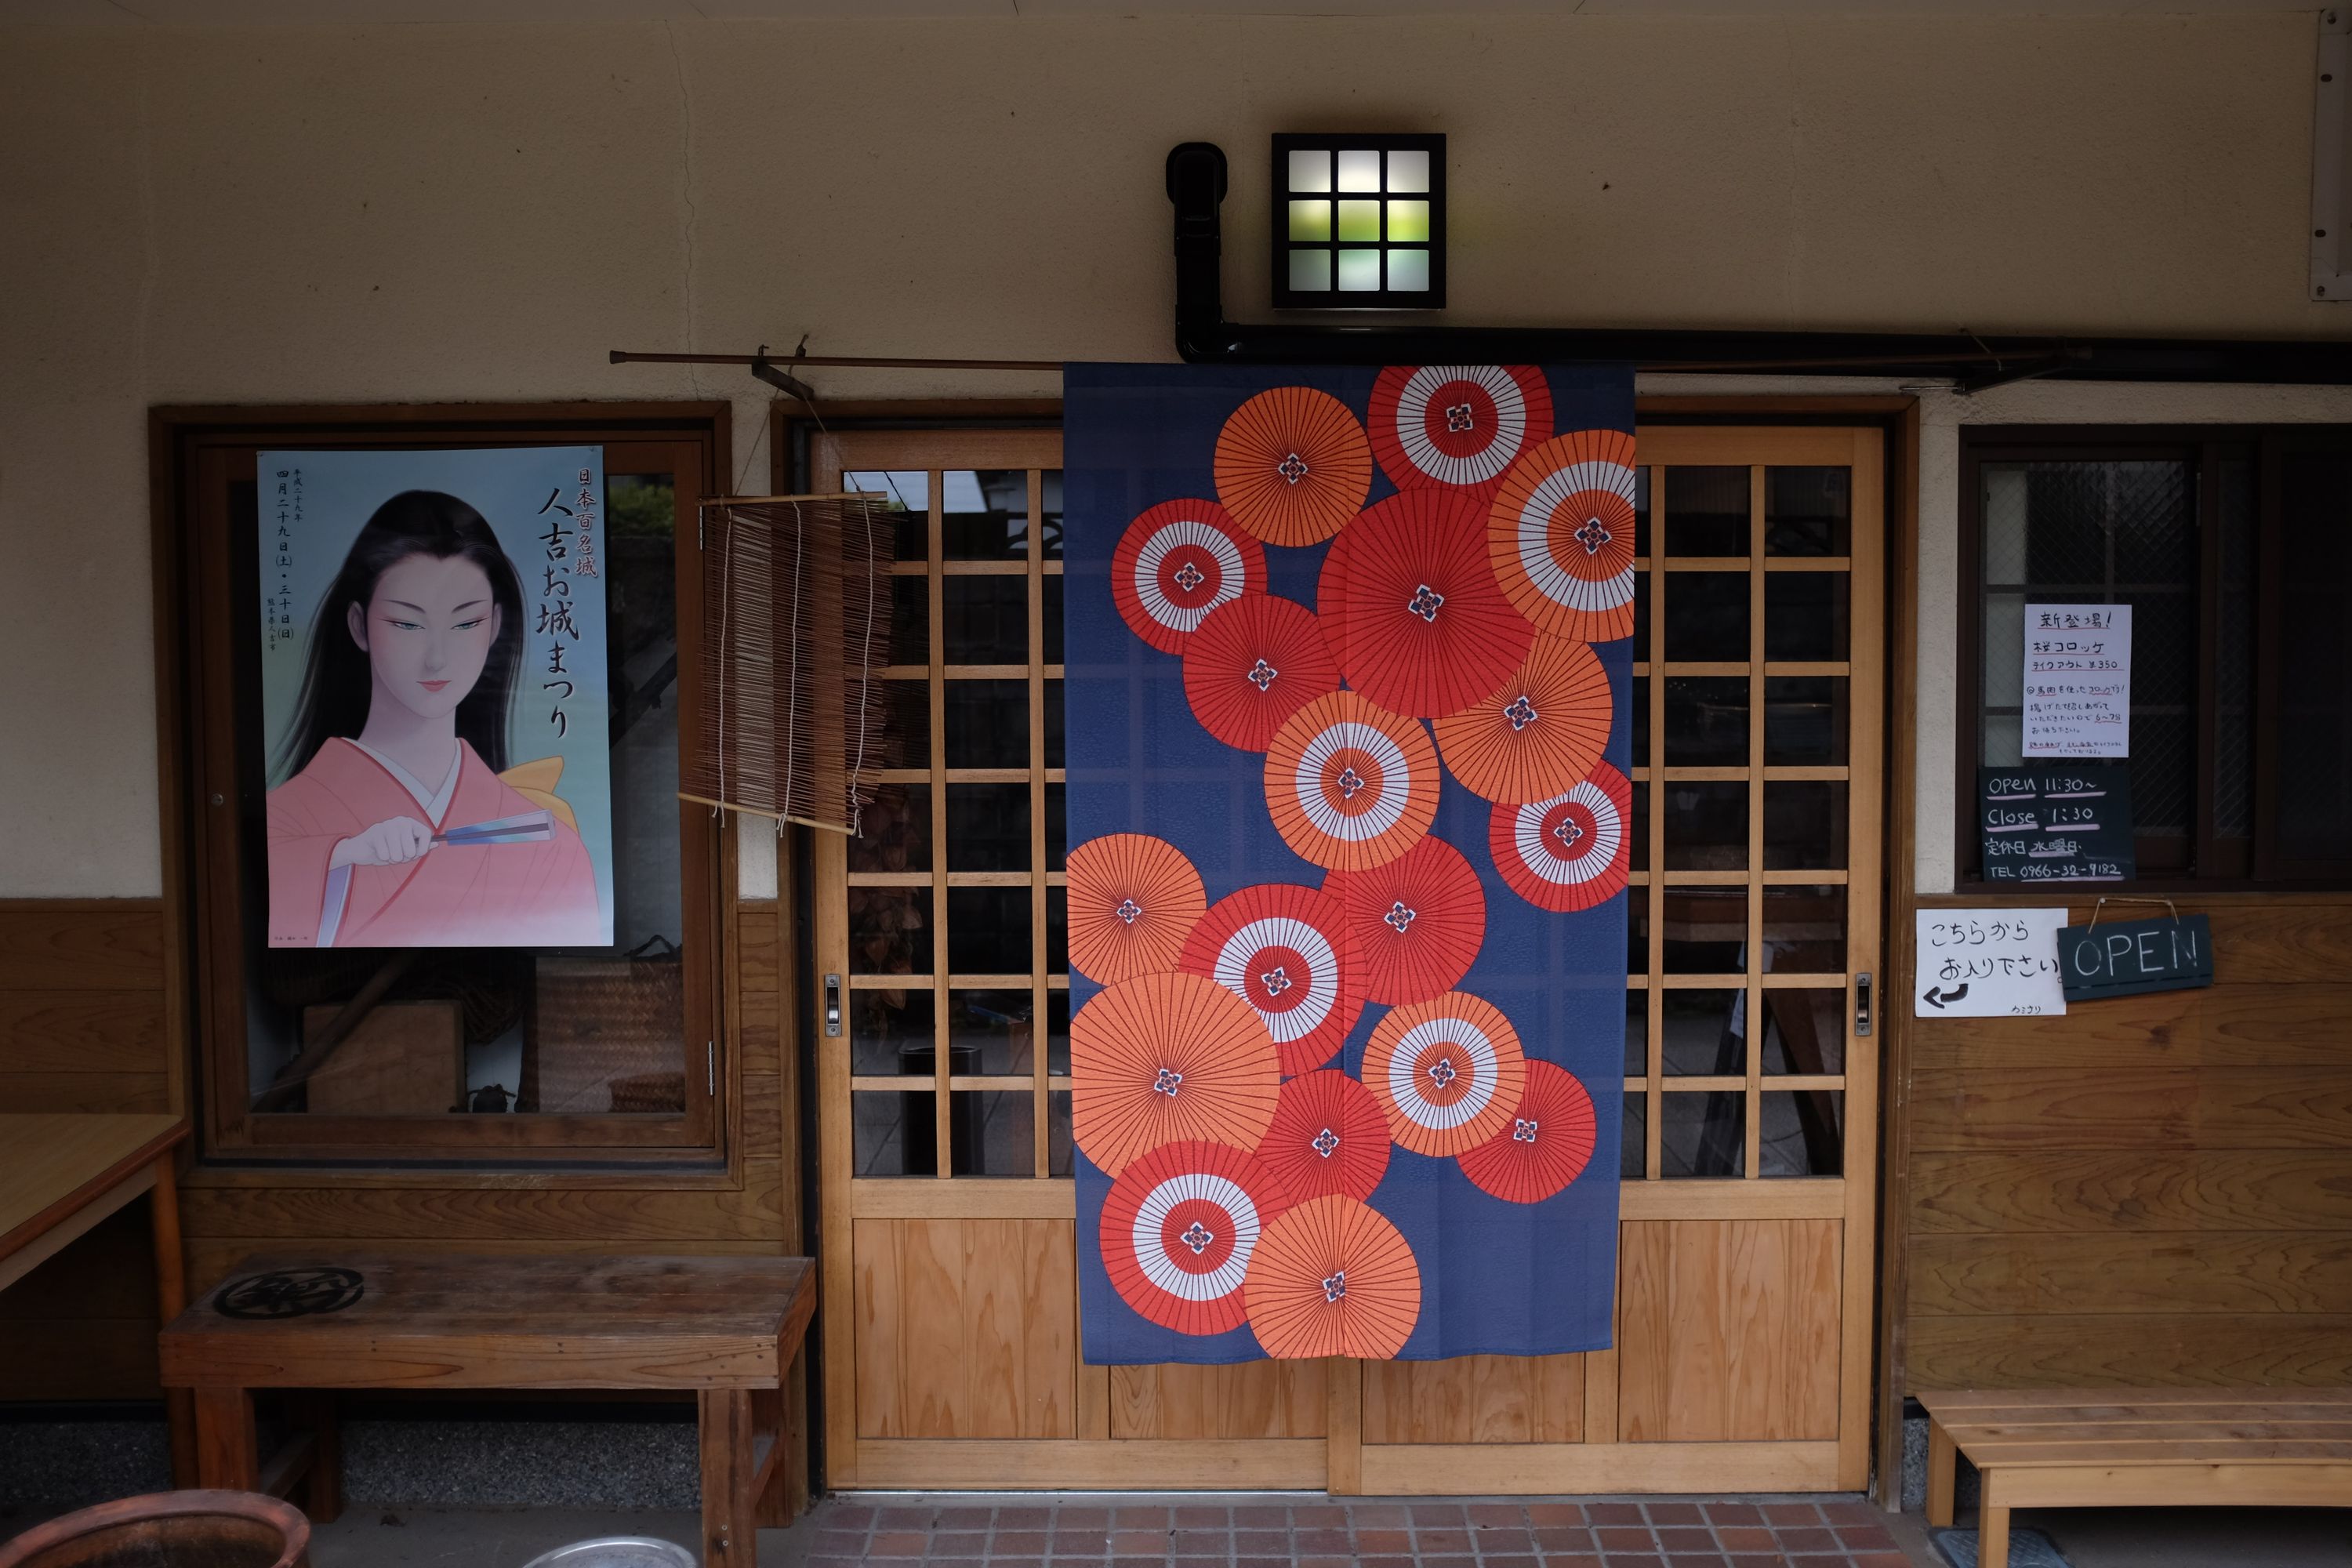 The sliding door of a Japanese restaurant, decorated with colorful circular motifs and a poster of a woman in a pink dress.